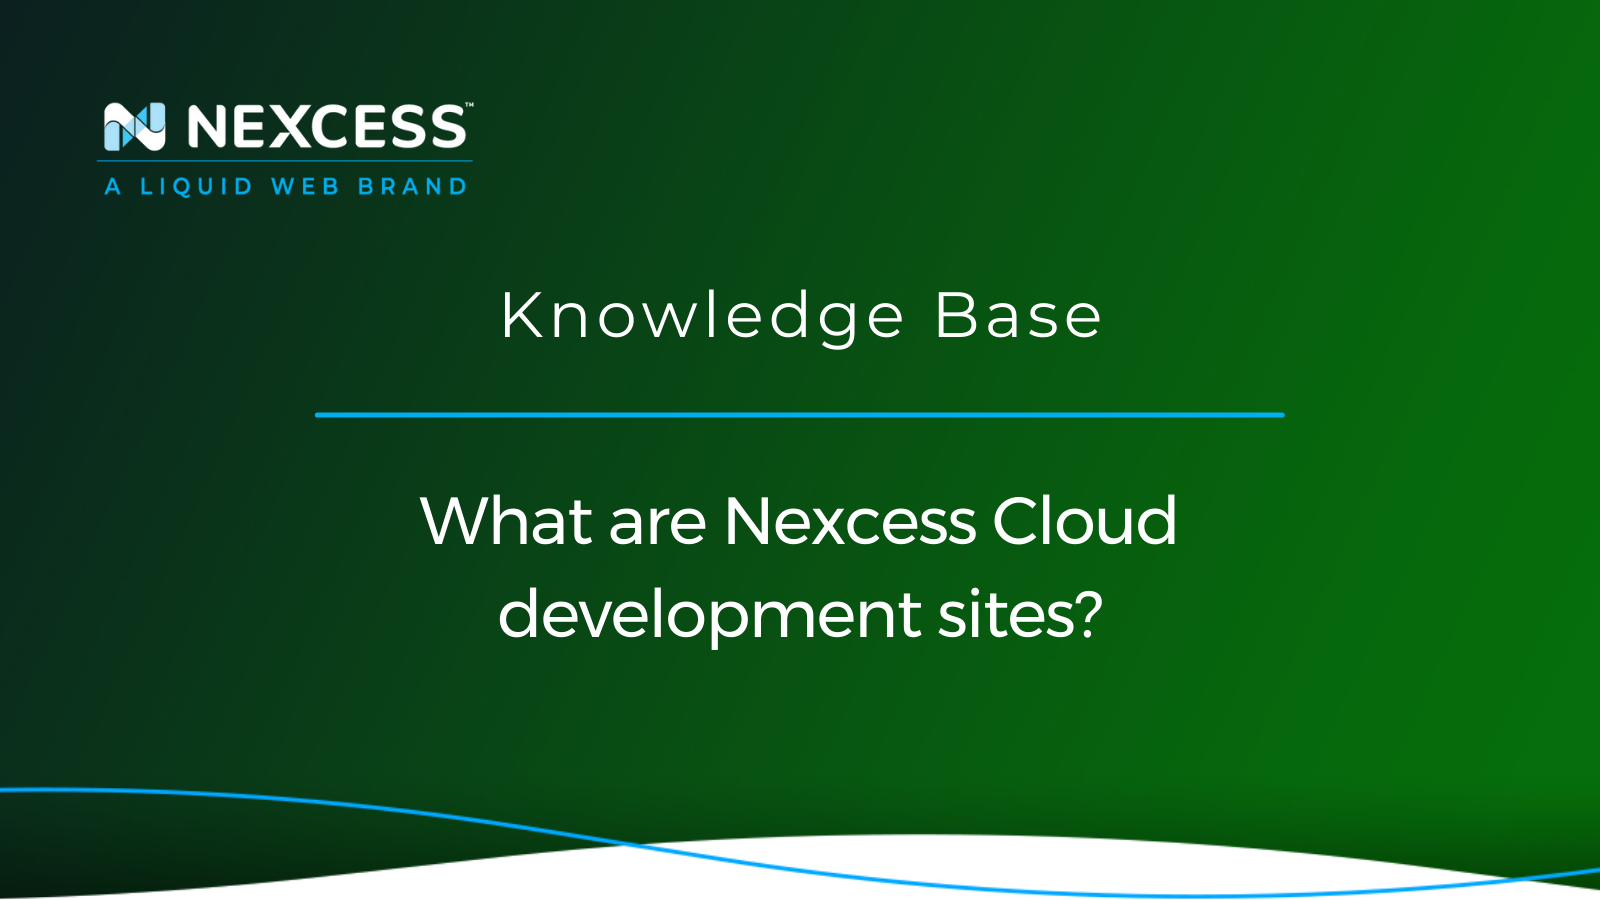 What are Nexcess Cloud development sites?